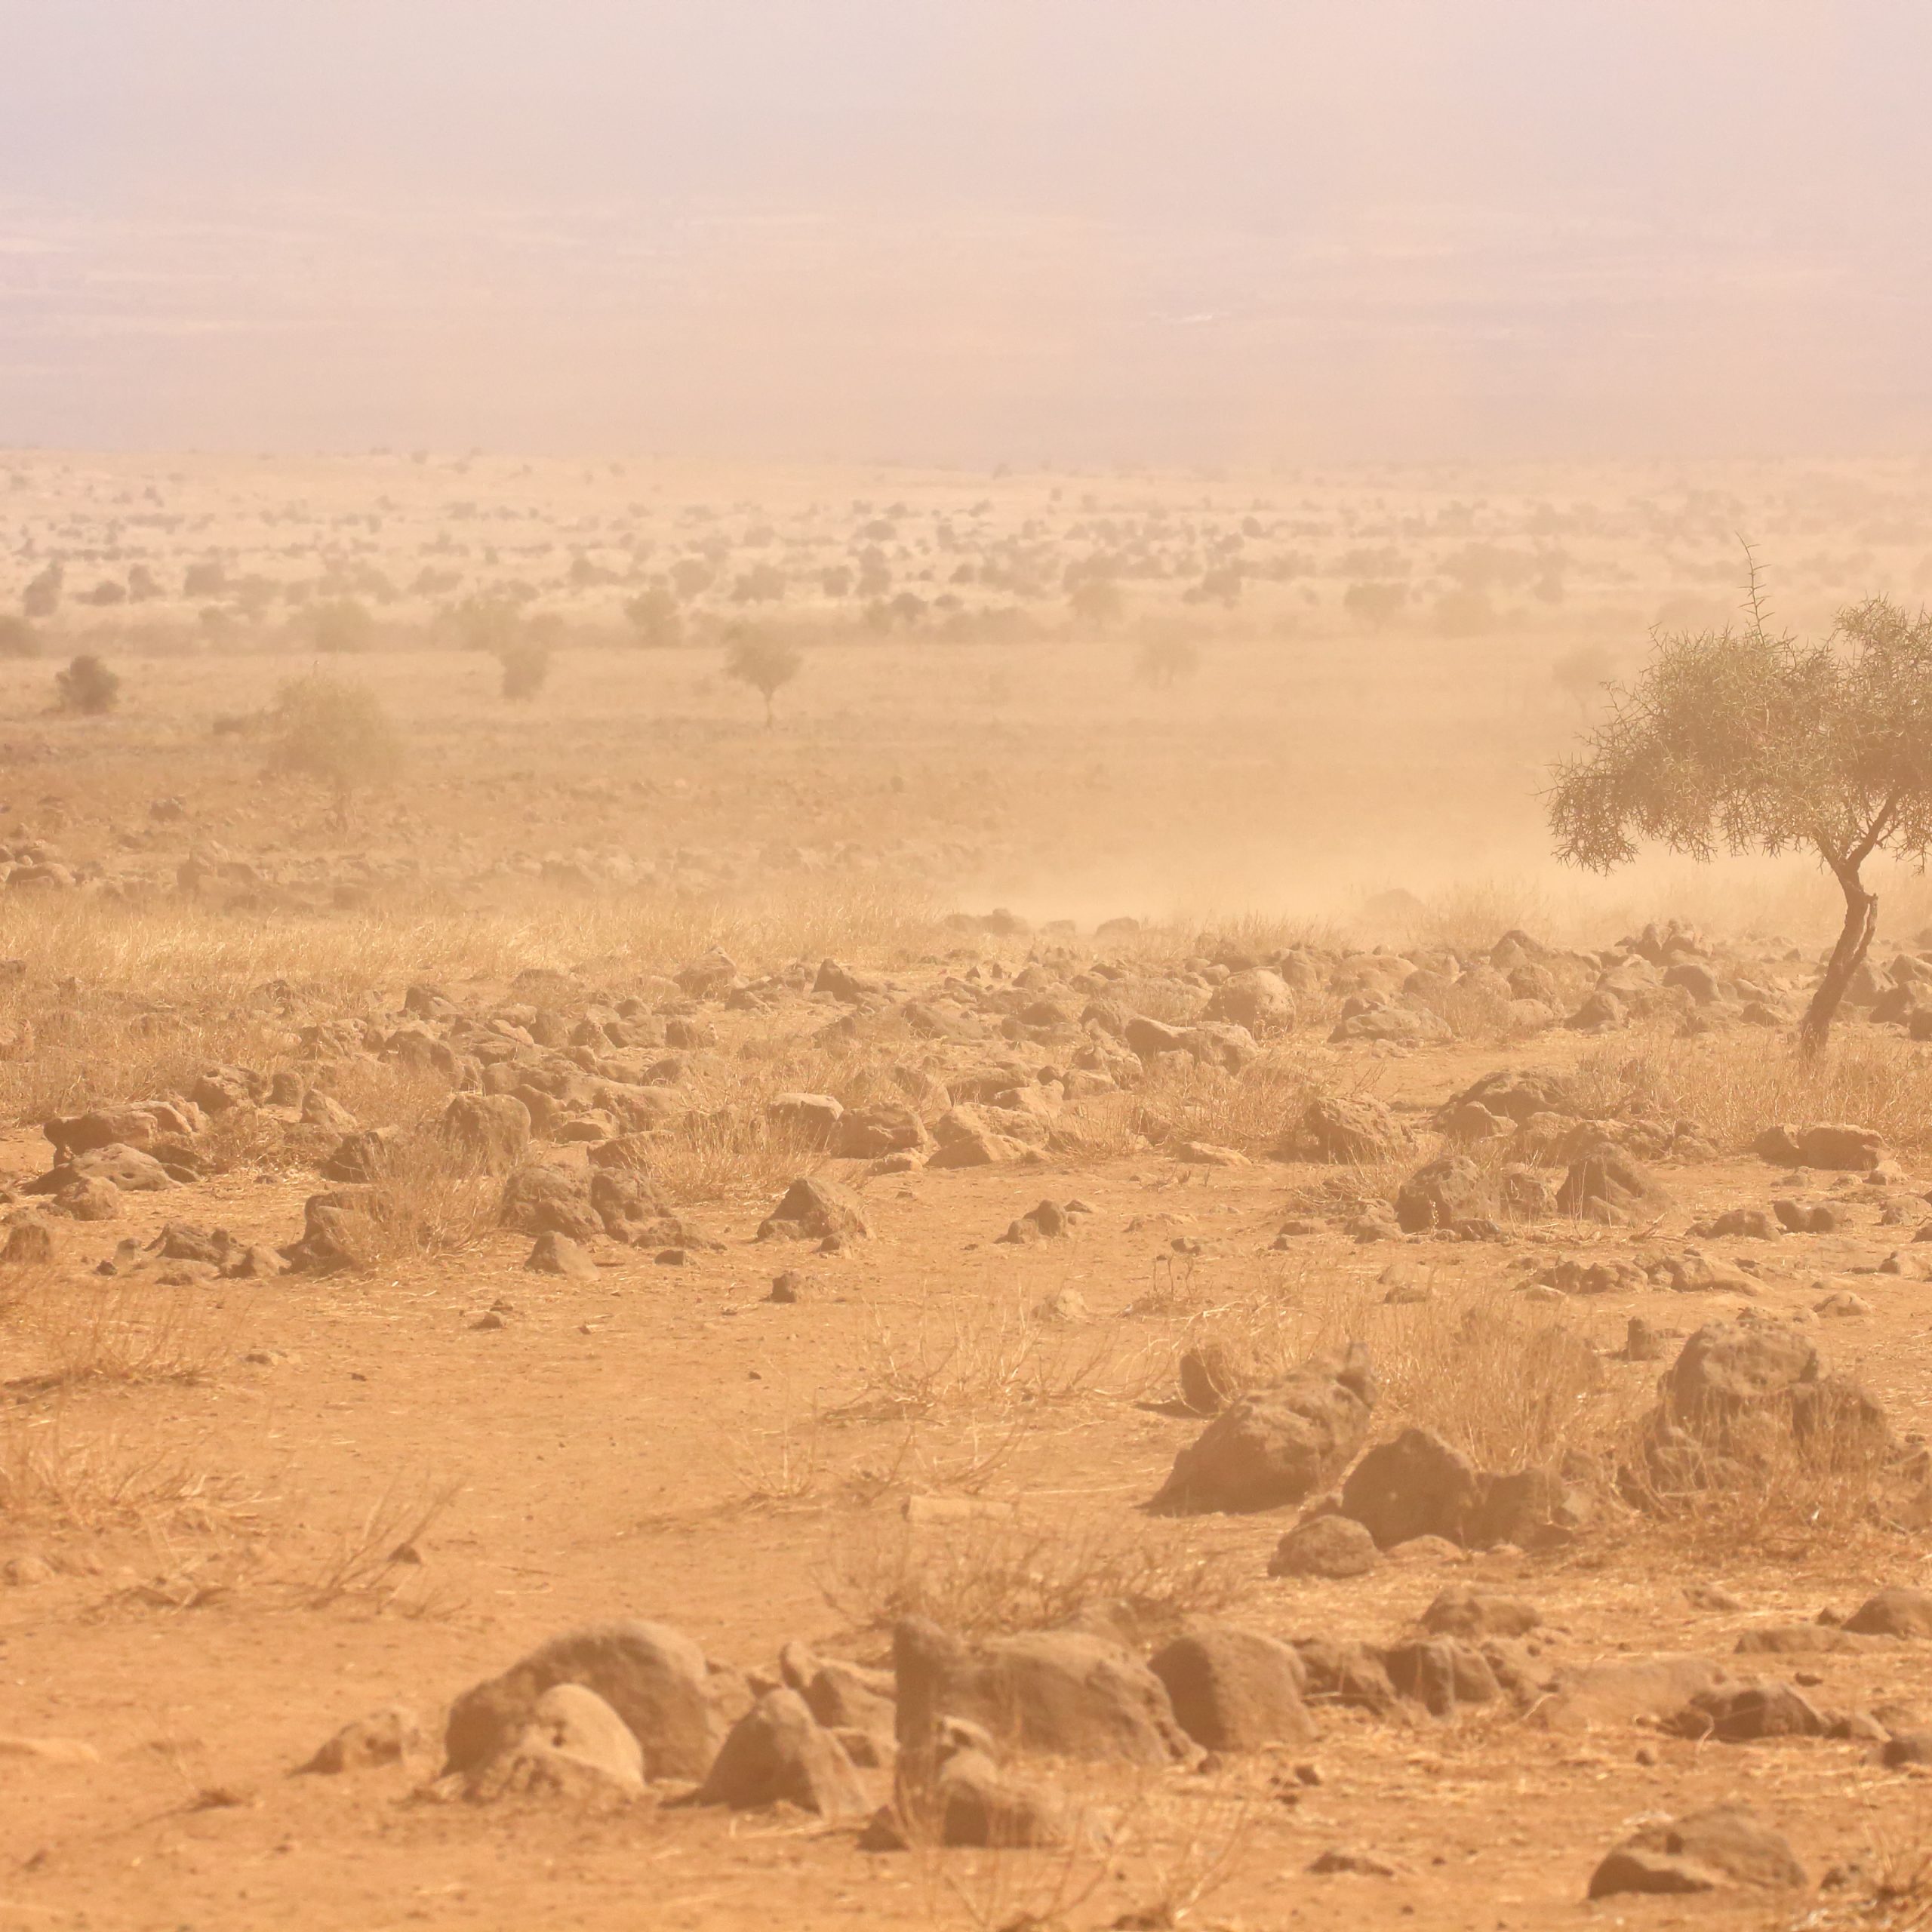 Barren plains with dust storm during a severe drought, Kenya